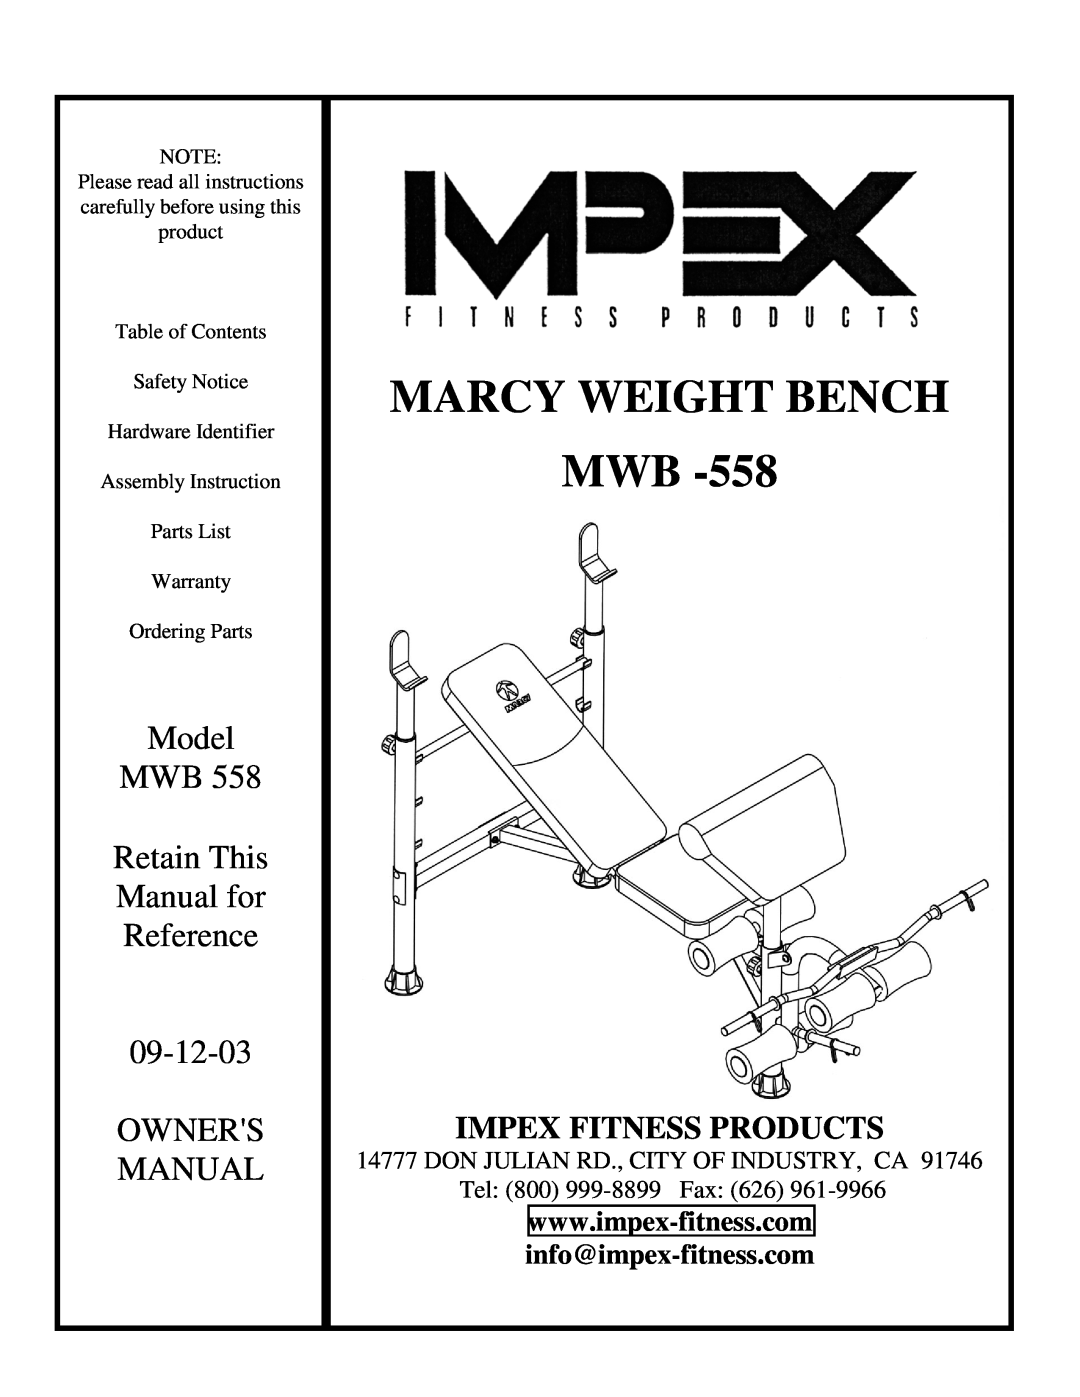 Impex MWB -558 manual info@impex-fitness.com, Marcy Weight Bench, Model, Retain This, Manual for, Reference, Owners 